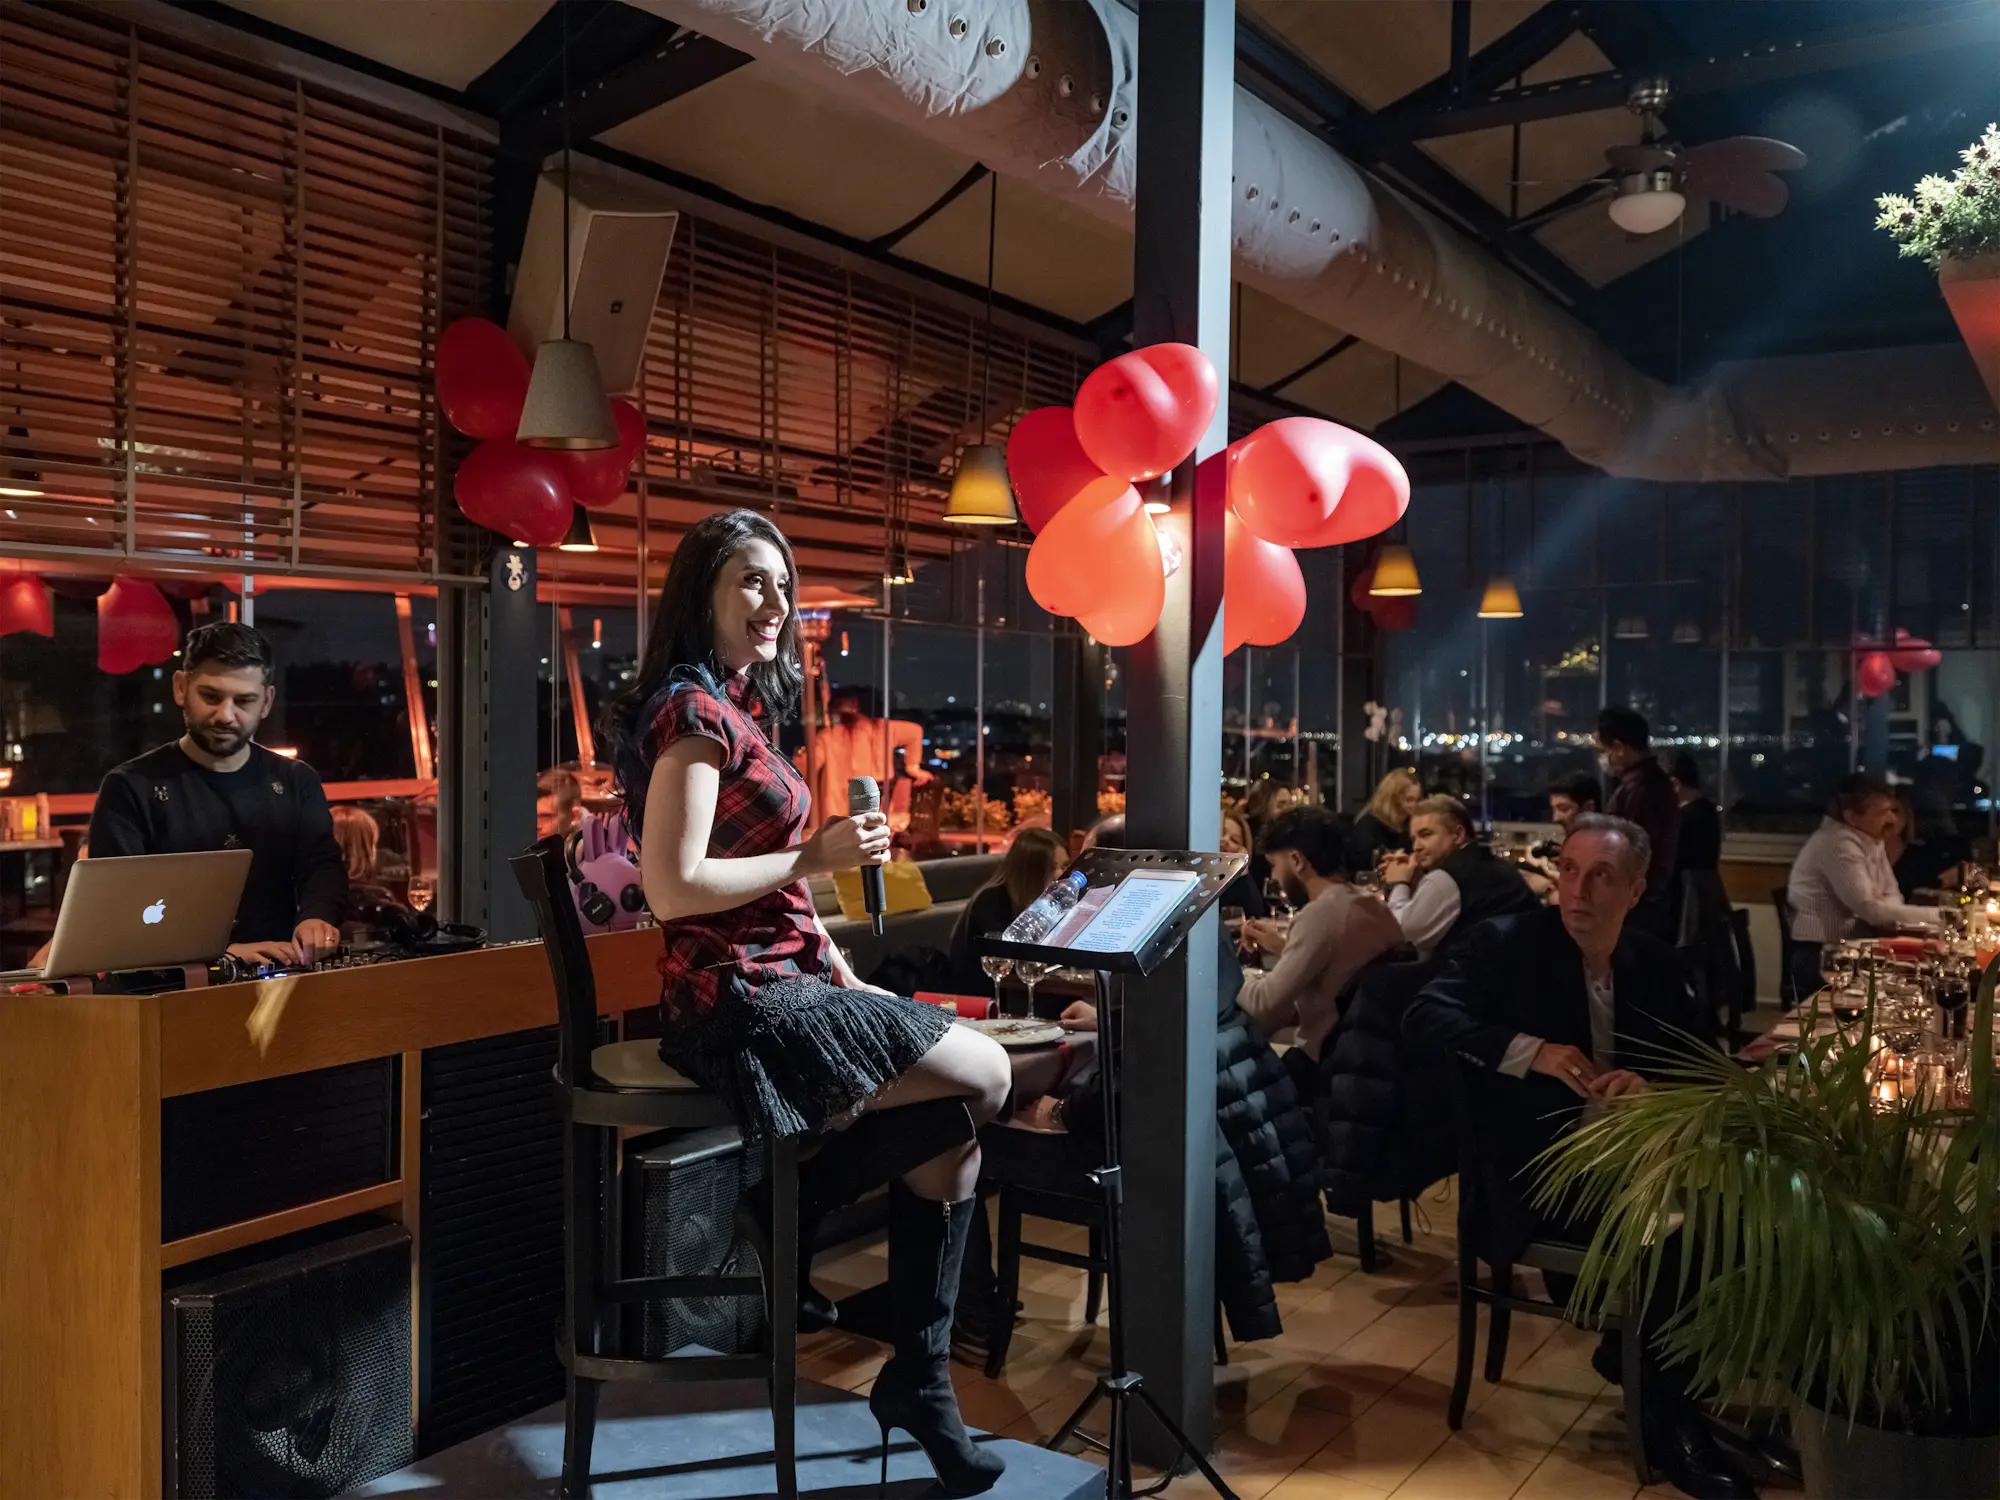 Enjoy the evening with world music and experience unforgettable moments at Litera.